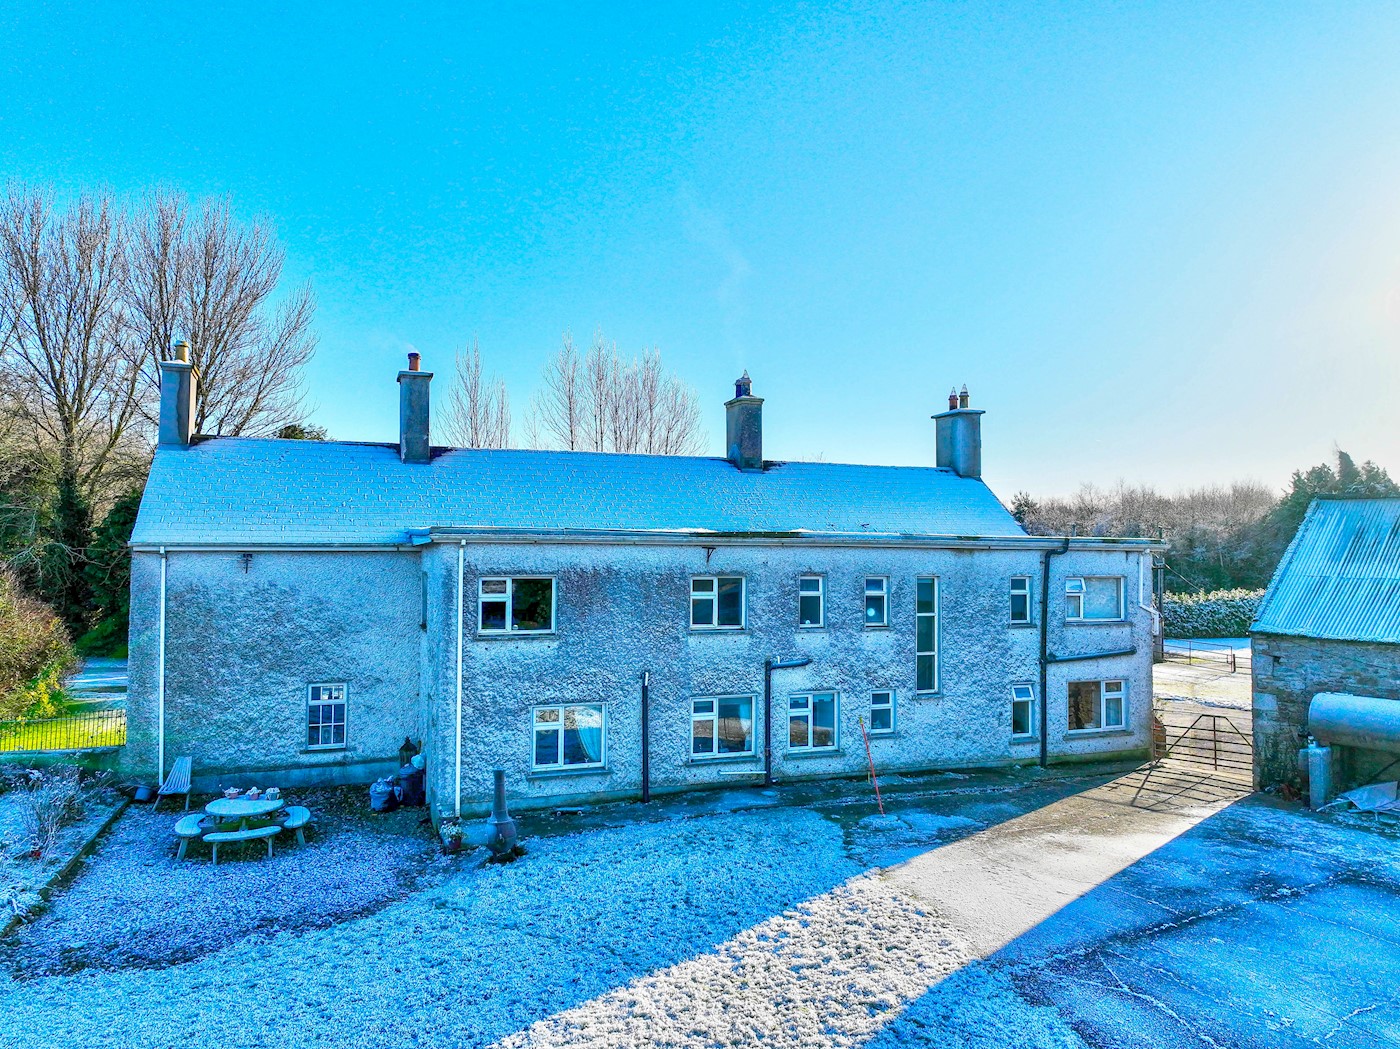 Country Home For Sale: Rearymore House and Lands, Rosenallis, Co. Laois